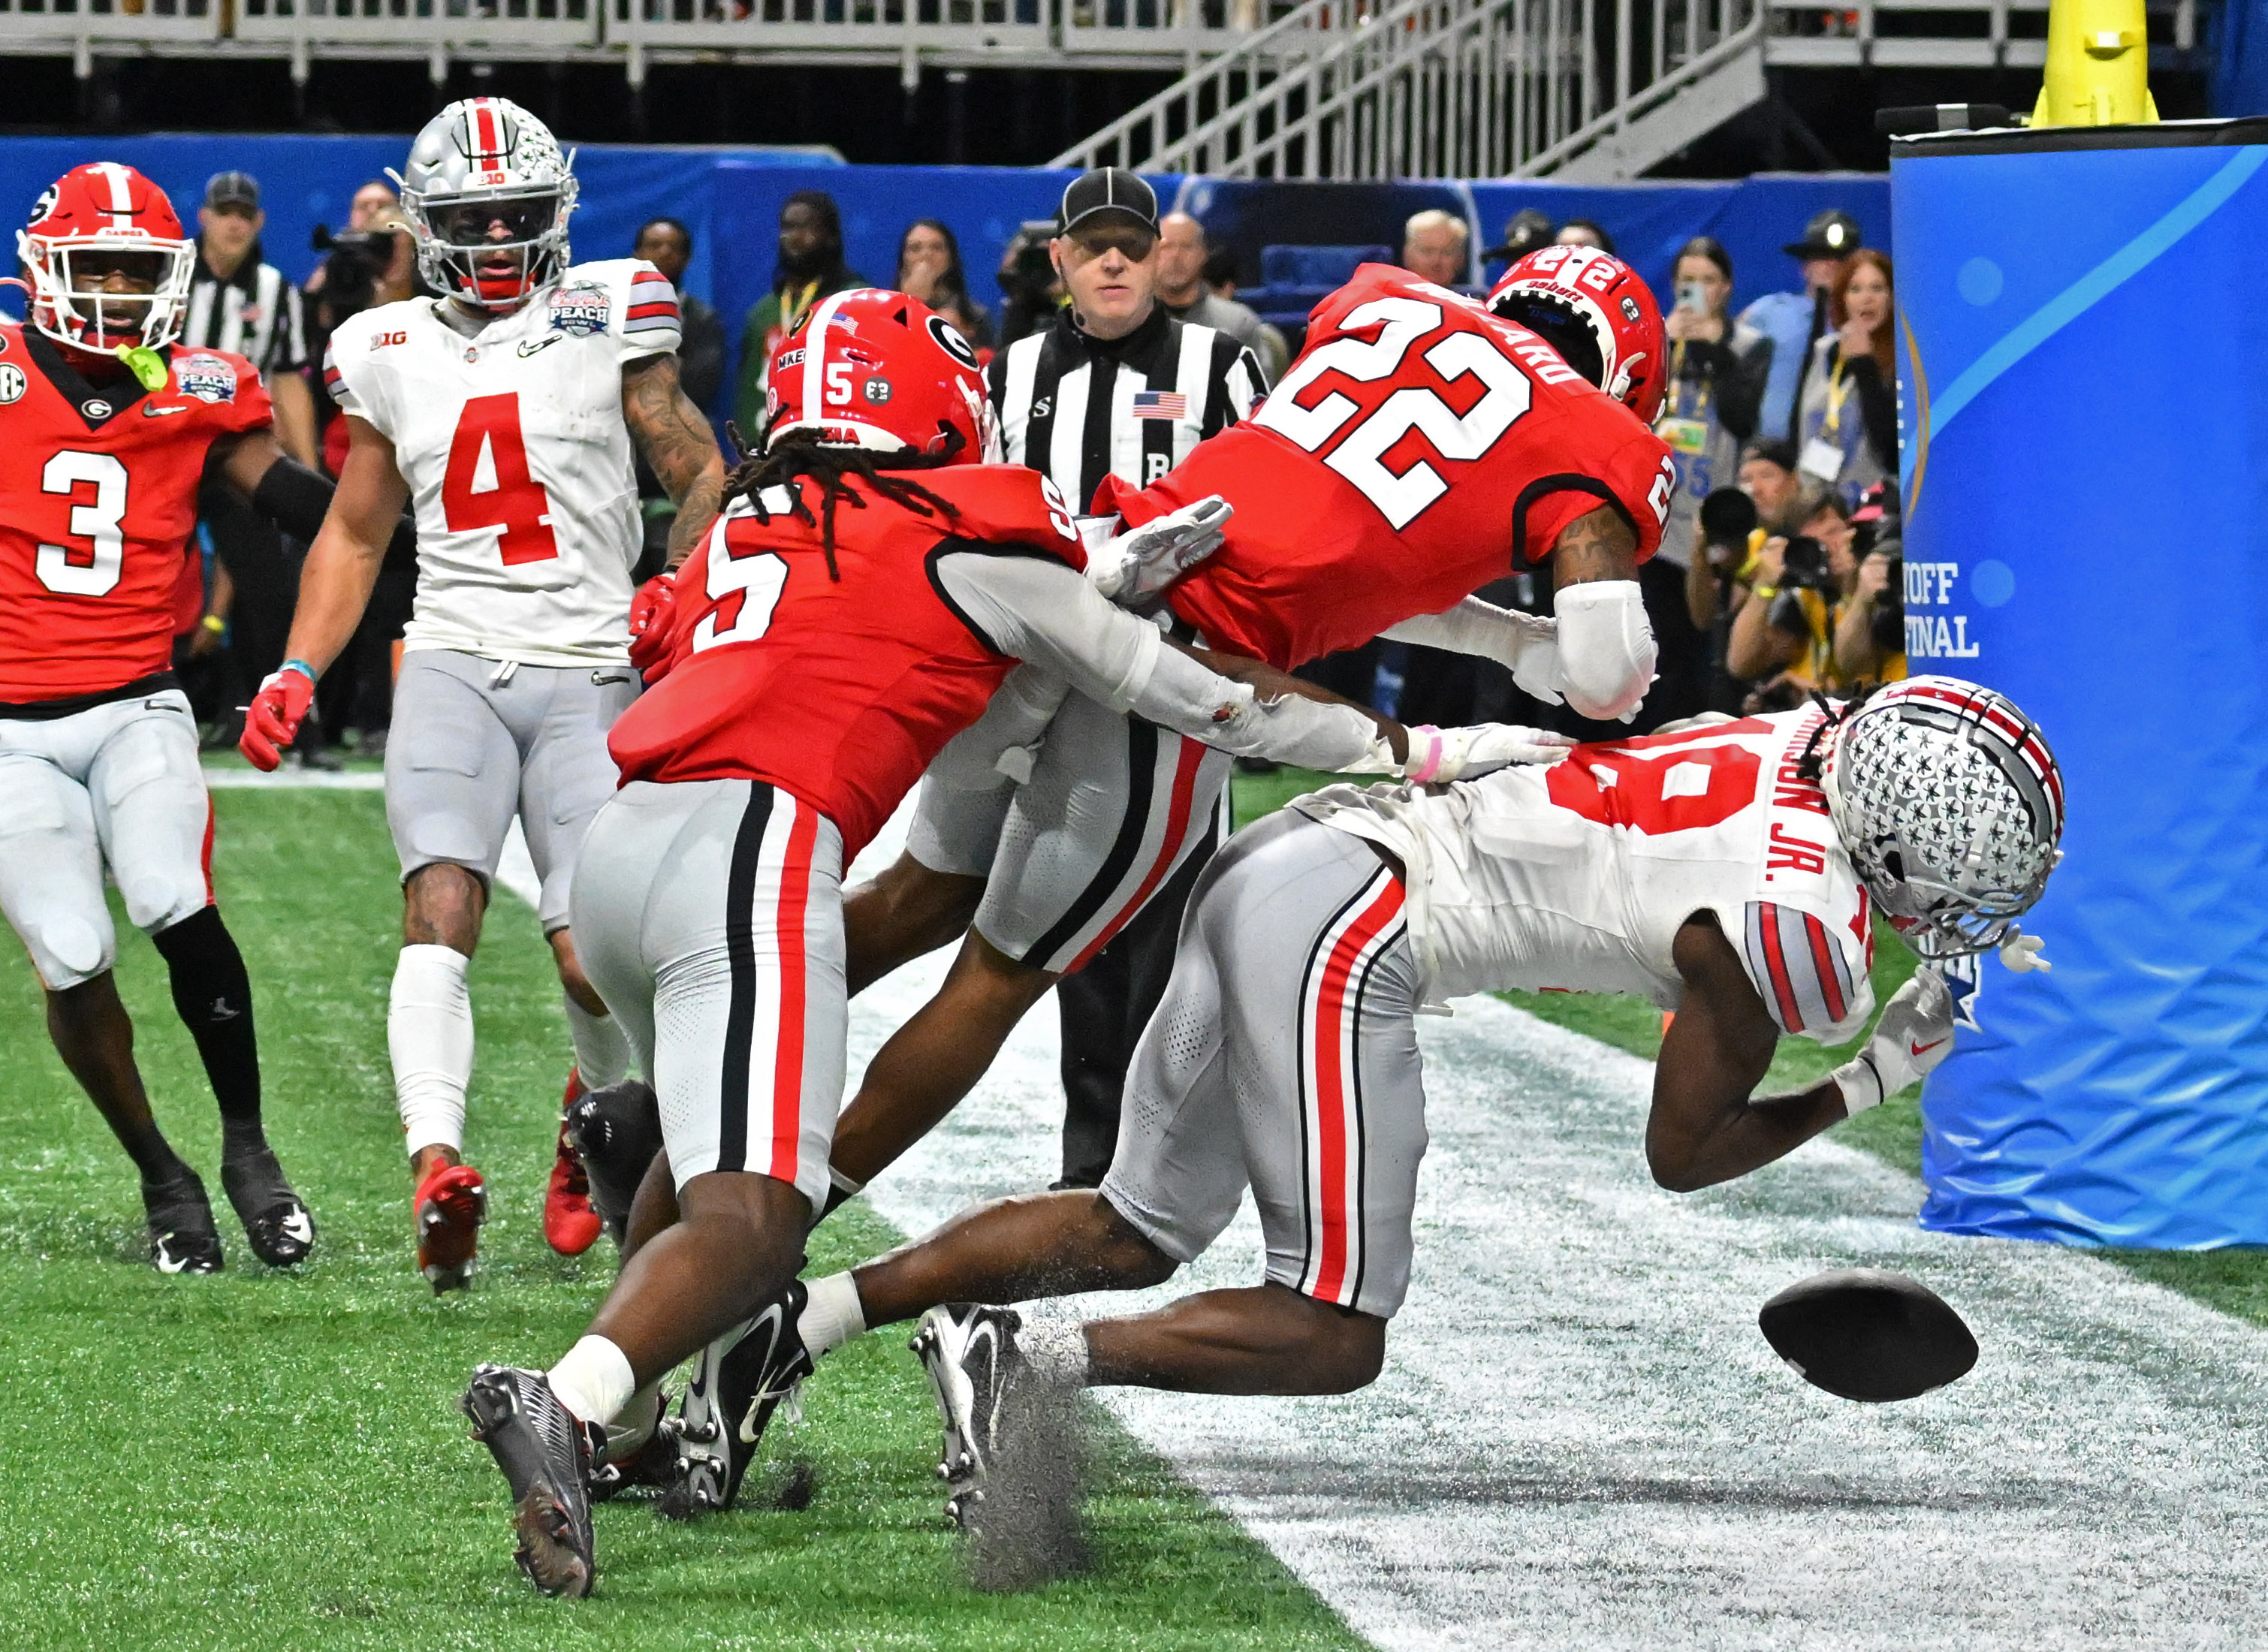 Georgia survives Ohio State in Peach Bowl to reach national title game